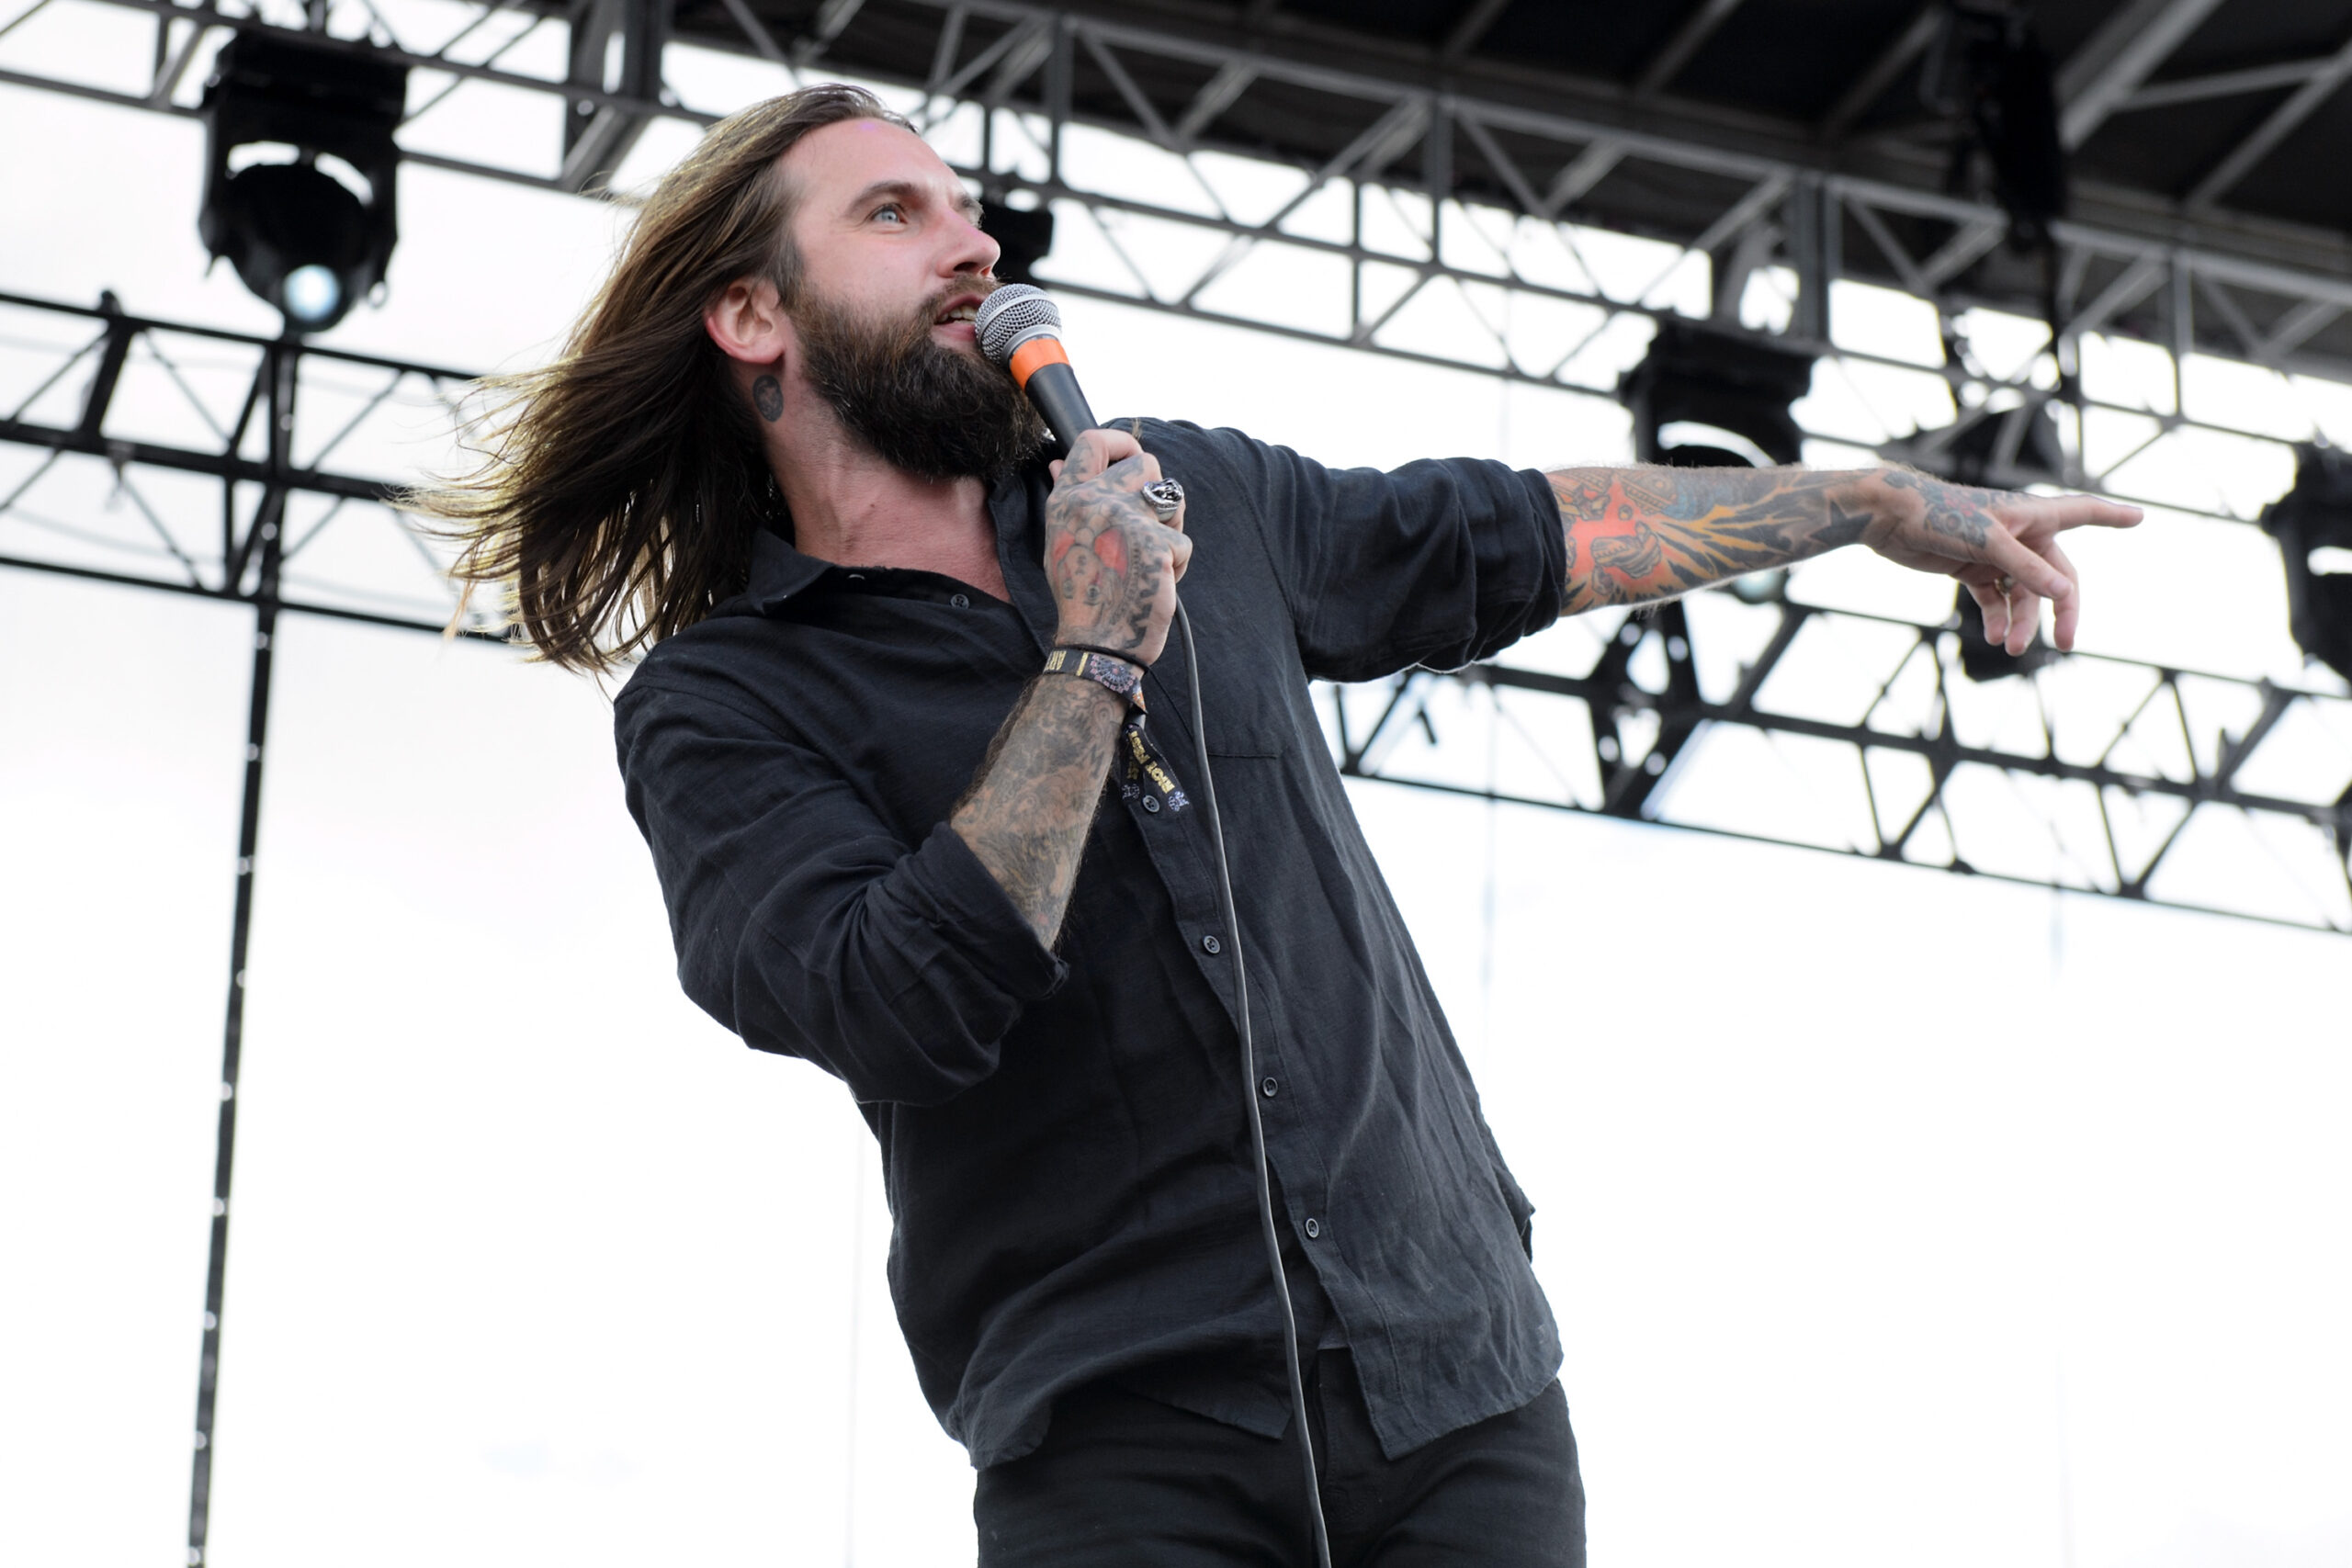 Every Time I Die, American Authors, and Baker Grace Lead This Week's Schedule for SPIN's Untitled Twitch Stream